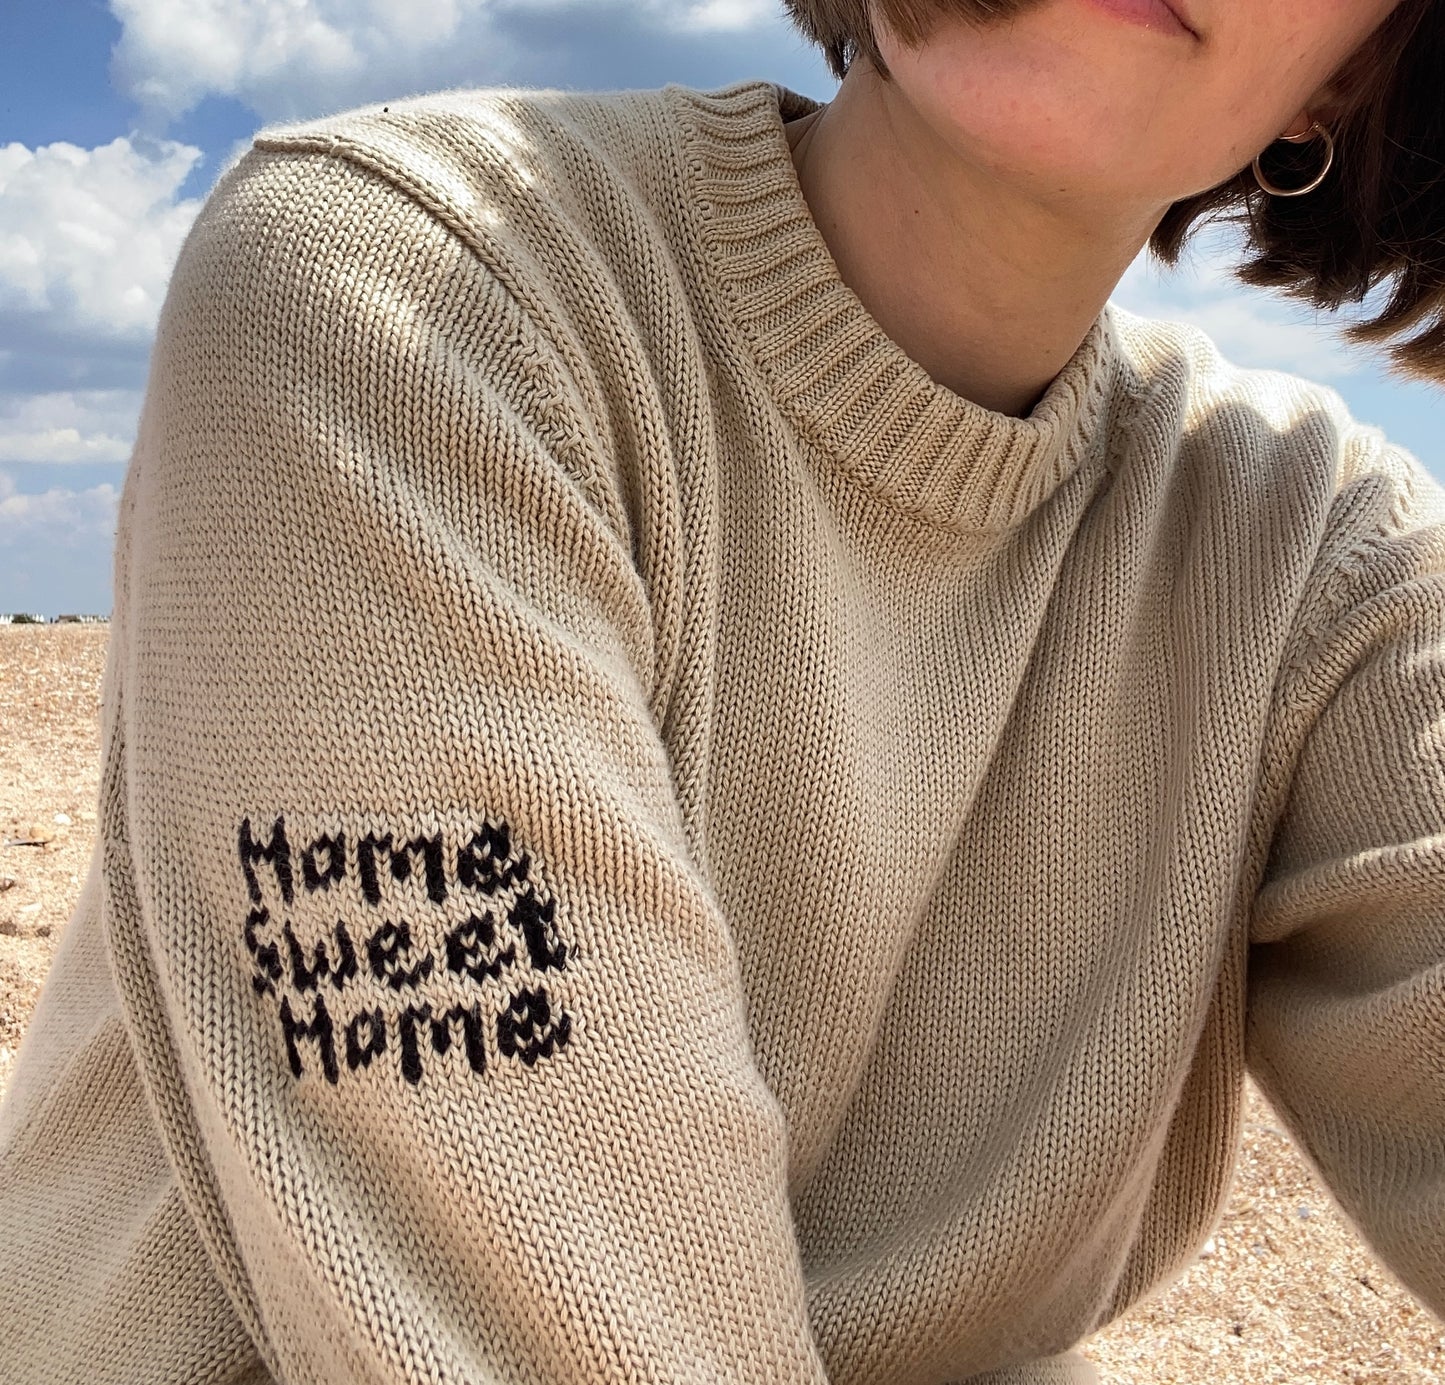 SAMPLE SALE Home Sweet Home Jumper SIZE S/M